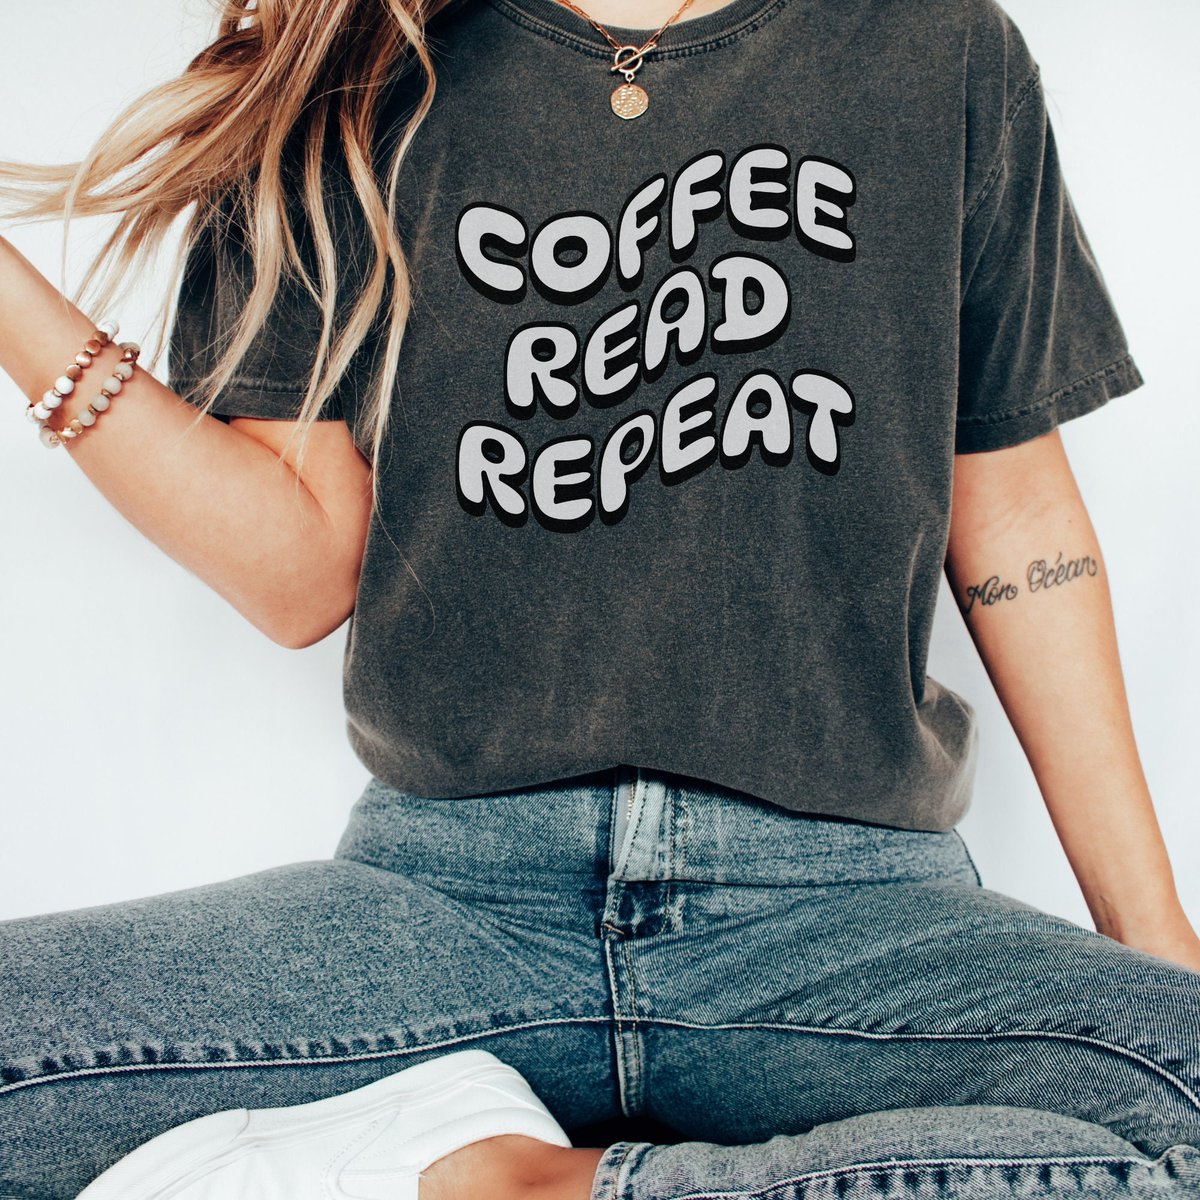 Excited to share the latest addition to my #etsy shop: Coffee, Read, Repeat, Reading Tshirt, Coffee Lover Shirt, Teachers Shirt, Library Shirt etsy.me/3HLNL55 #coffee #read #repeat #readingtshirt #coffeelovershirt #teachersshirt #libraryshirt #booklover #coffee